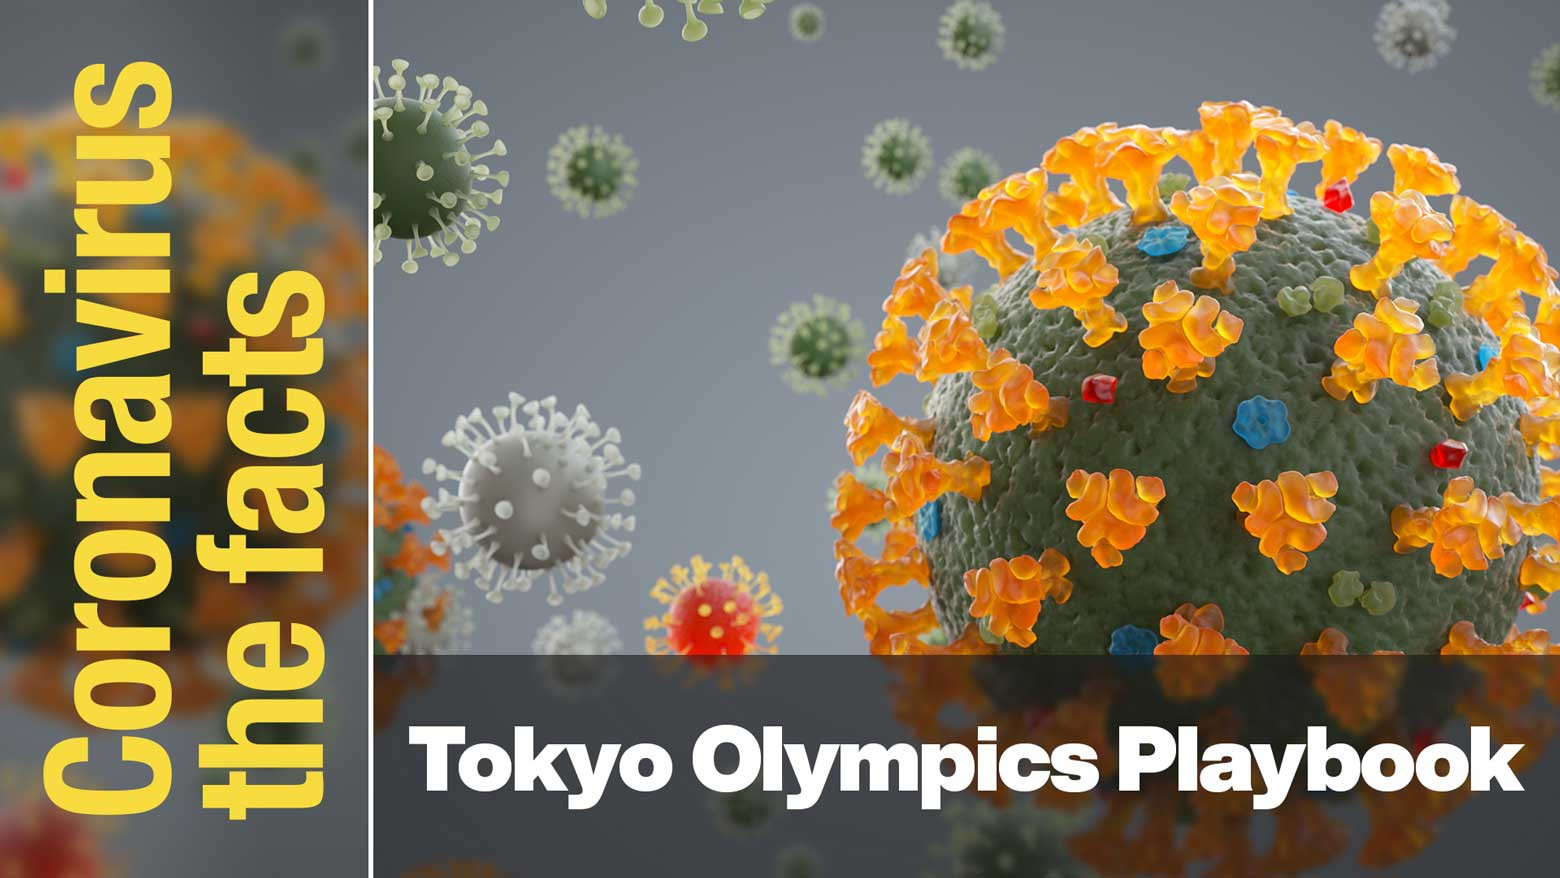 COVID-19 Playbook for the Tokyo Olympics